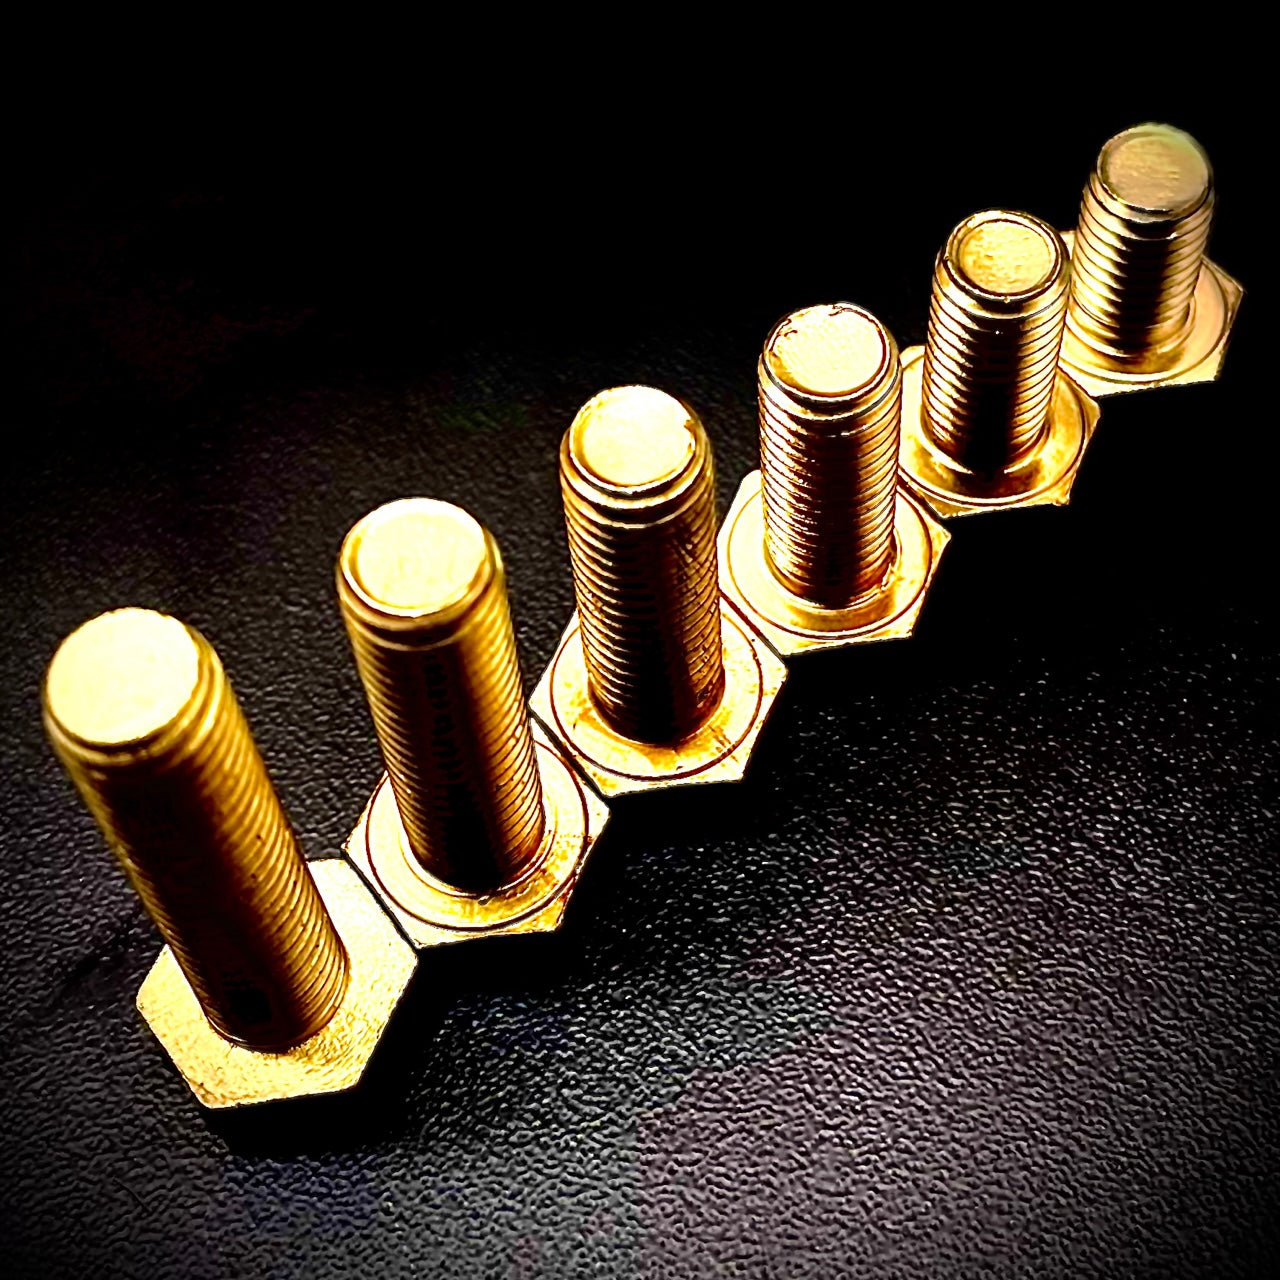 M10 Brass Hex Set Screw Fully Threaded Bolt DIN933 - Fixaball Ltd. Fixings and Fasteners UK